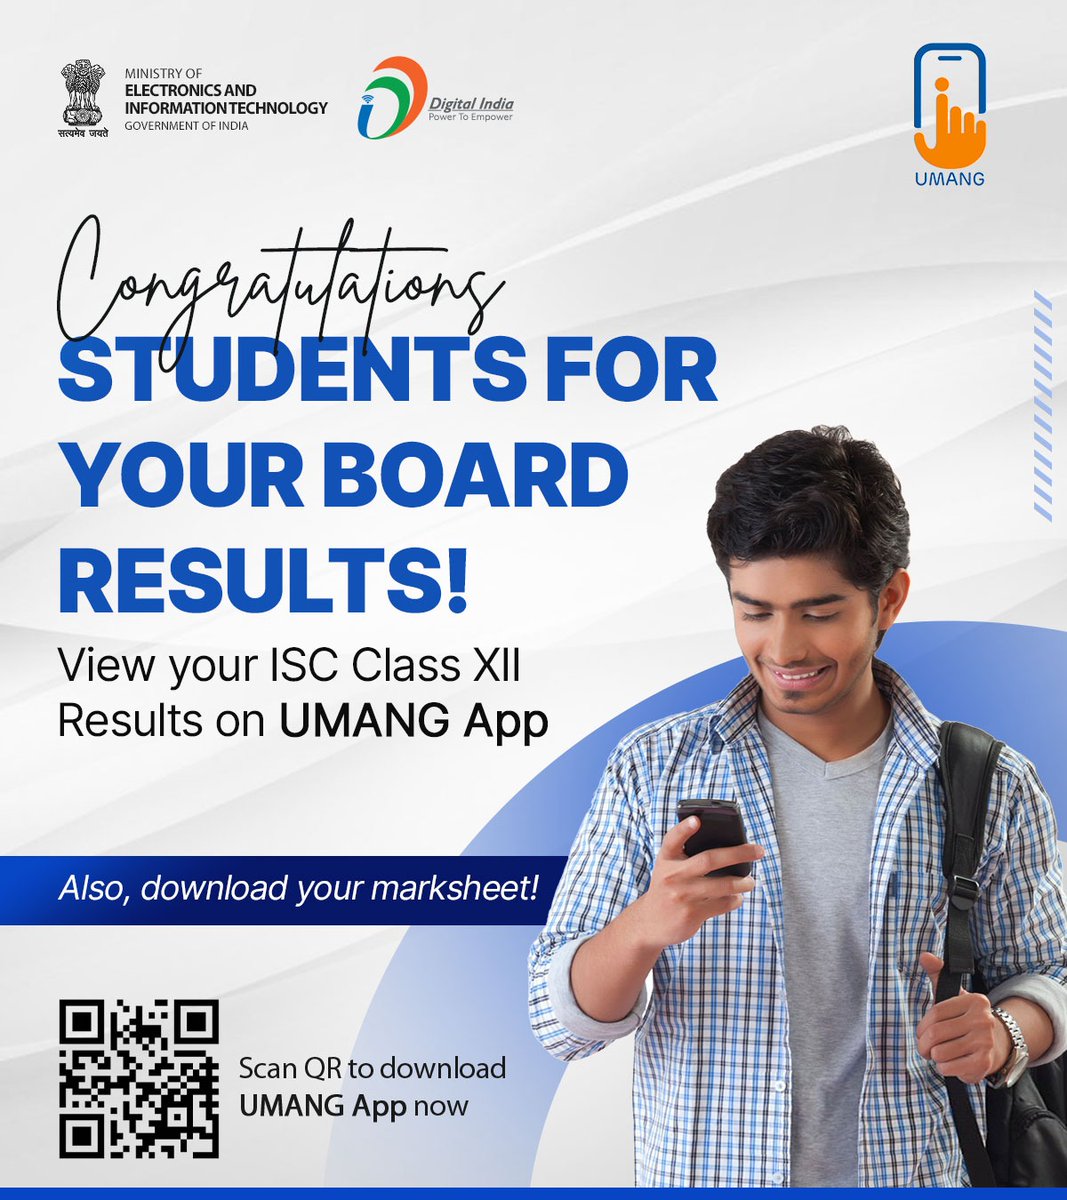 ✨CISCE Class XII students, check your results now on #DigiLocker or #UMANGapp. All the best! DigiLocker: results.digilocker.gov.in UMANG: web.umang.gov.in #DigitalIndia @digilocker_ind @UmangOfficial_